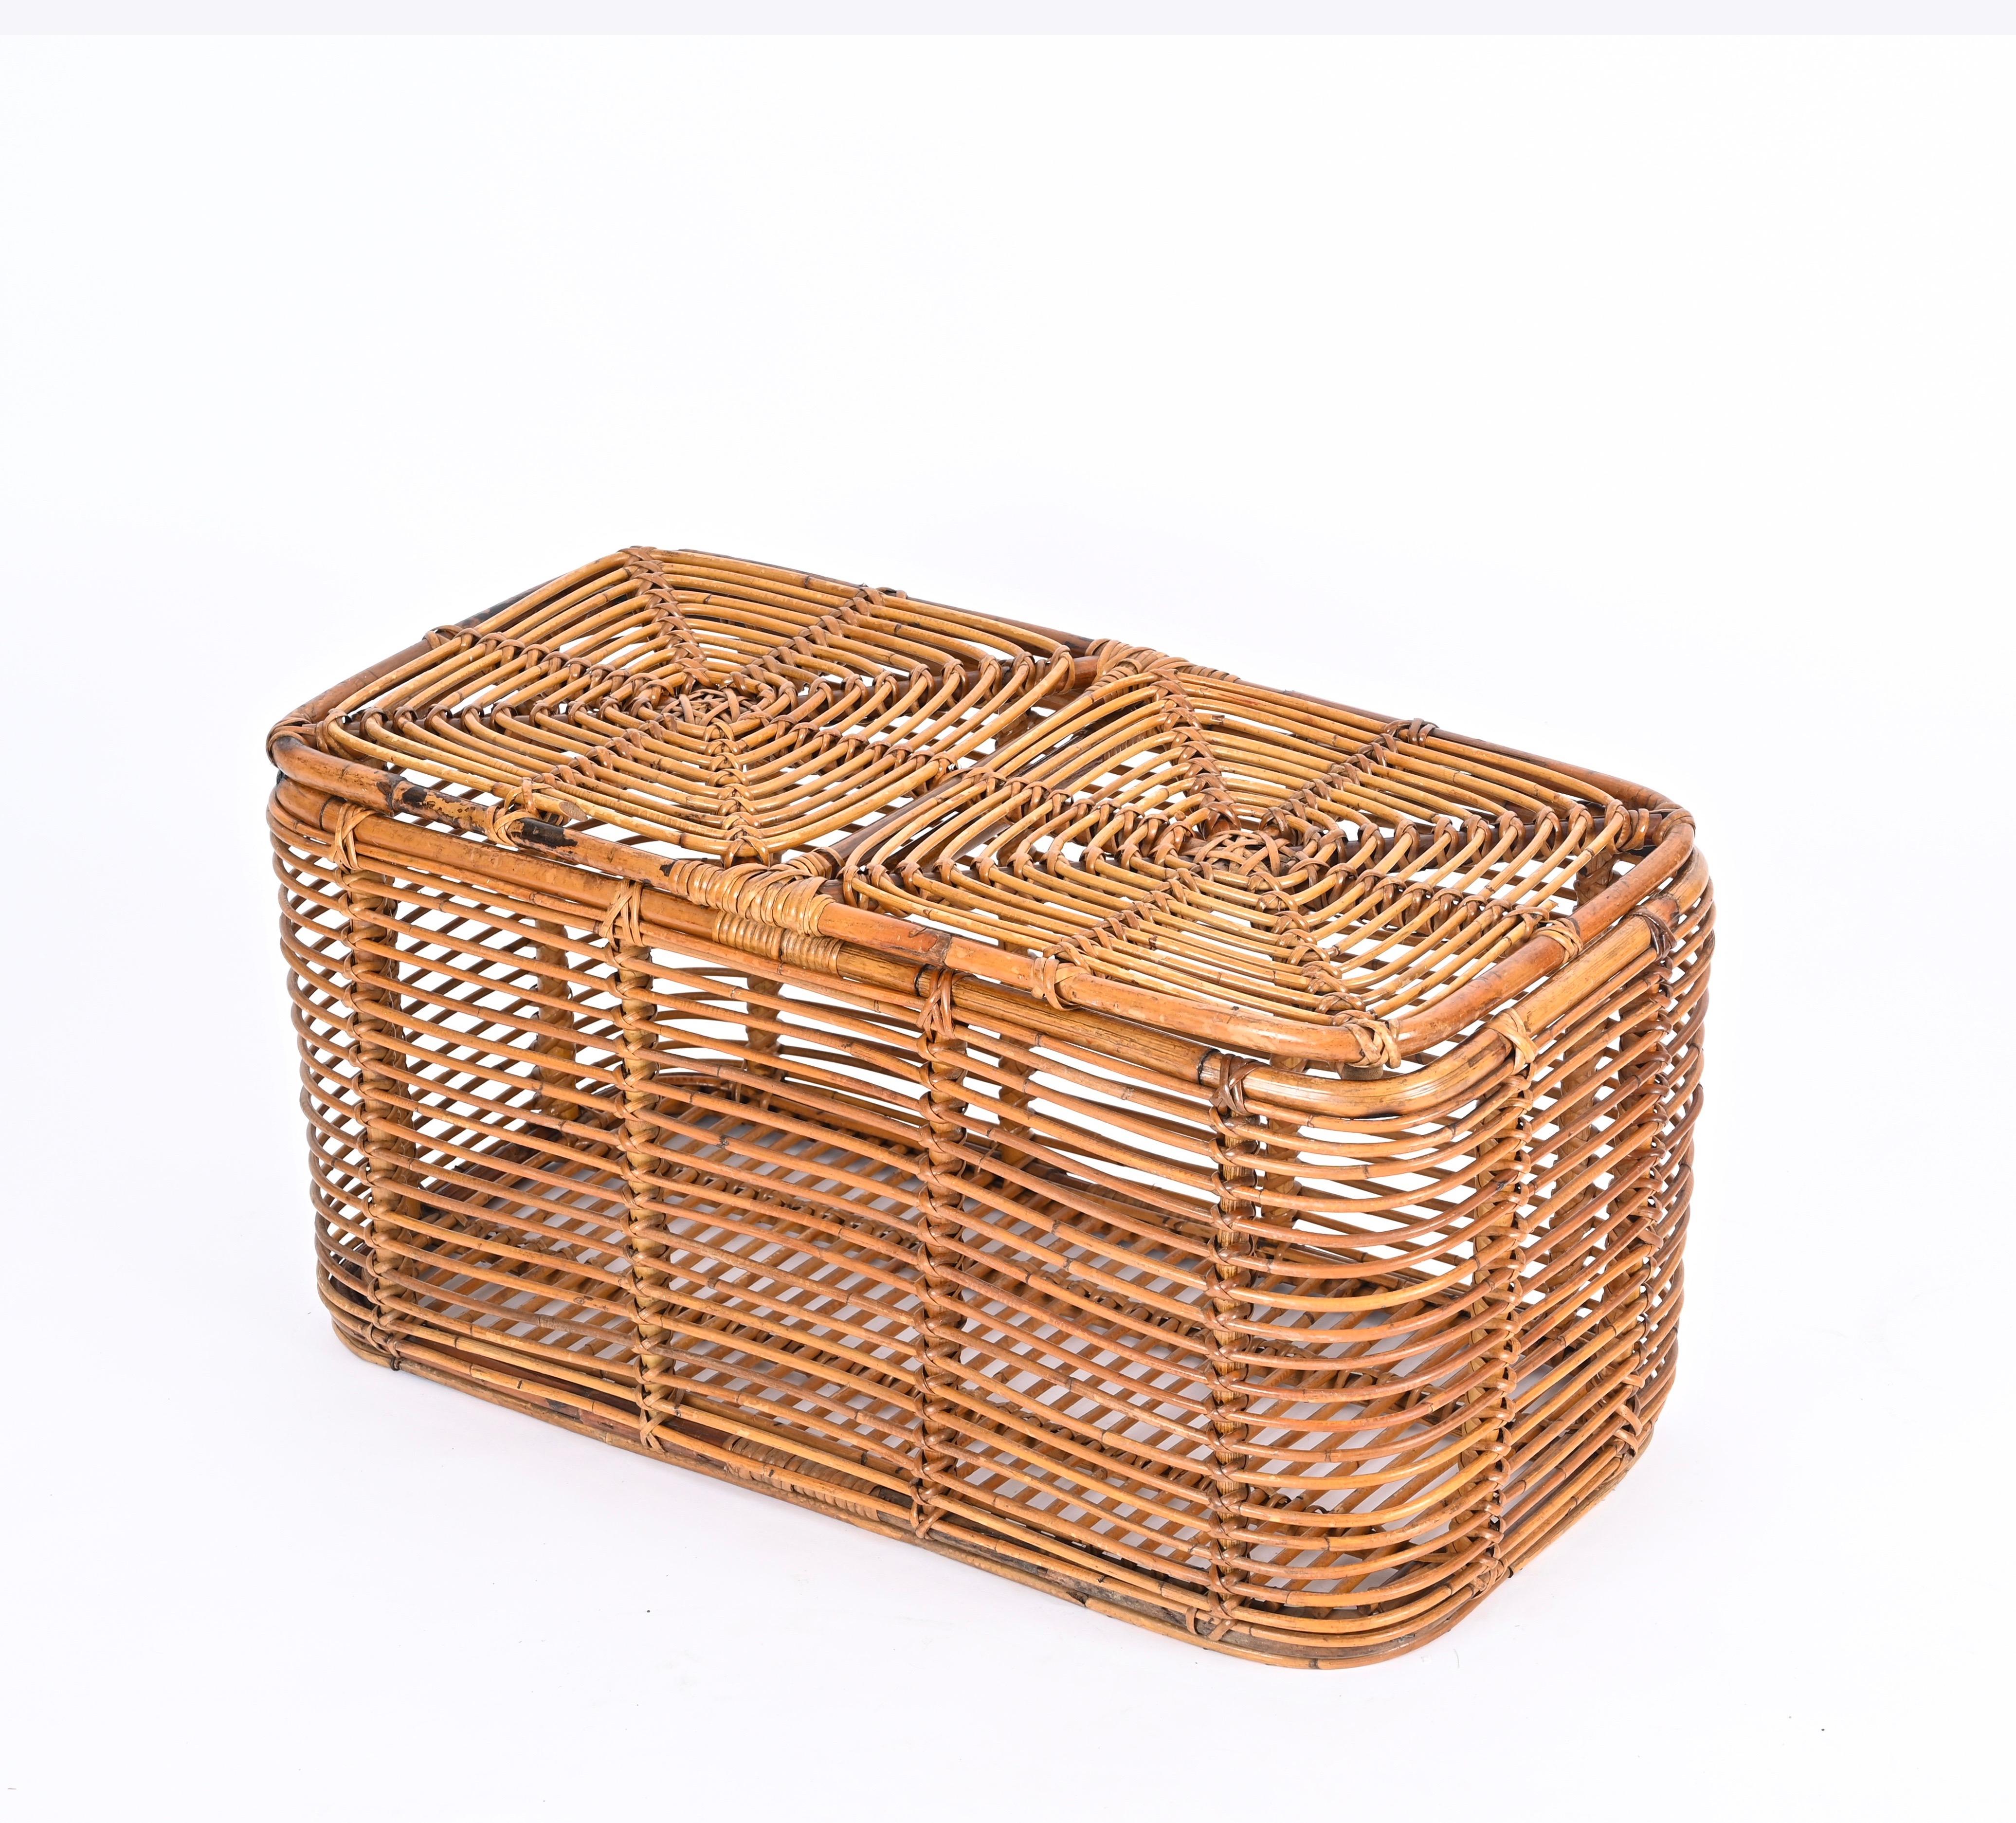 Midcentury French Riviera Bamboo and Woven Rattan Italian Basket, 1960s For Sale 8